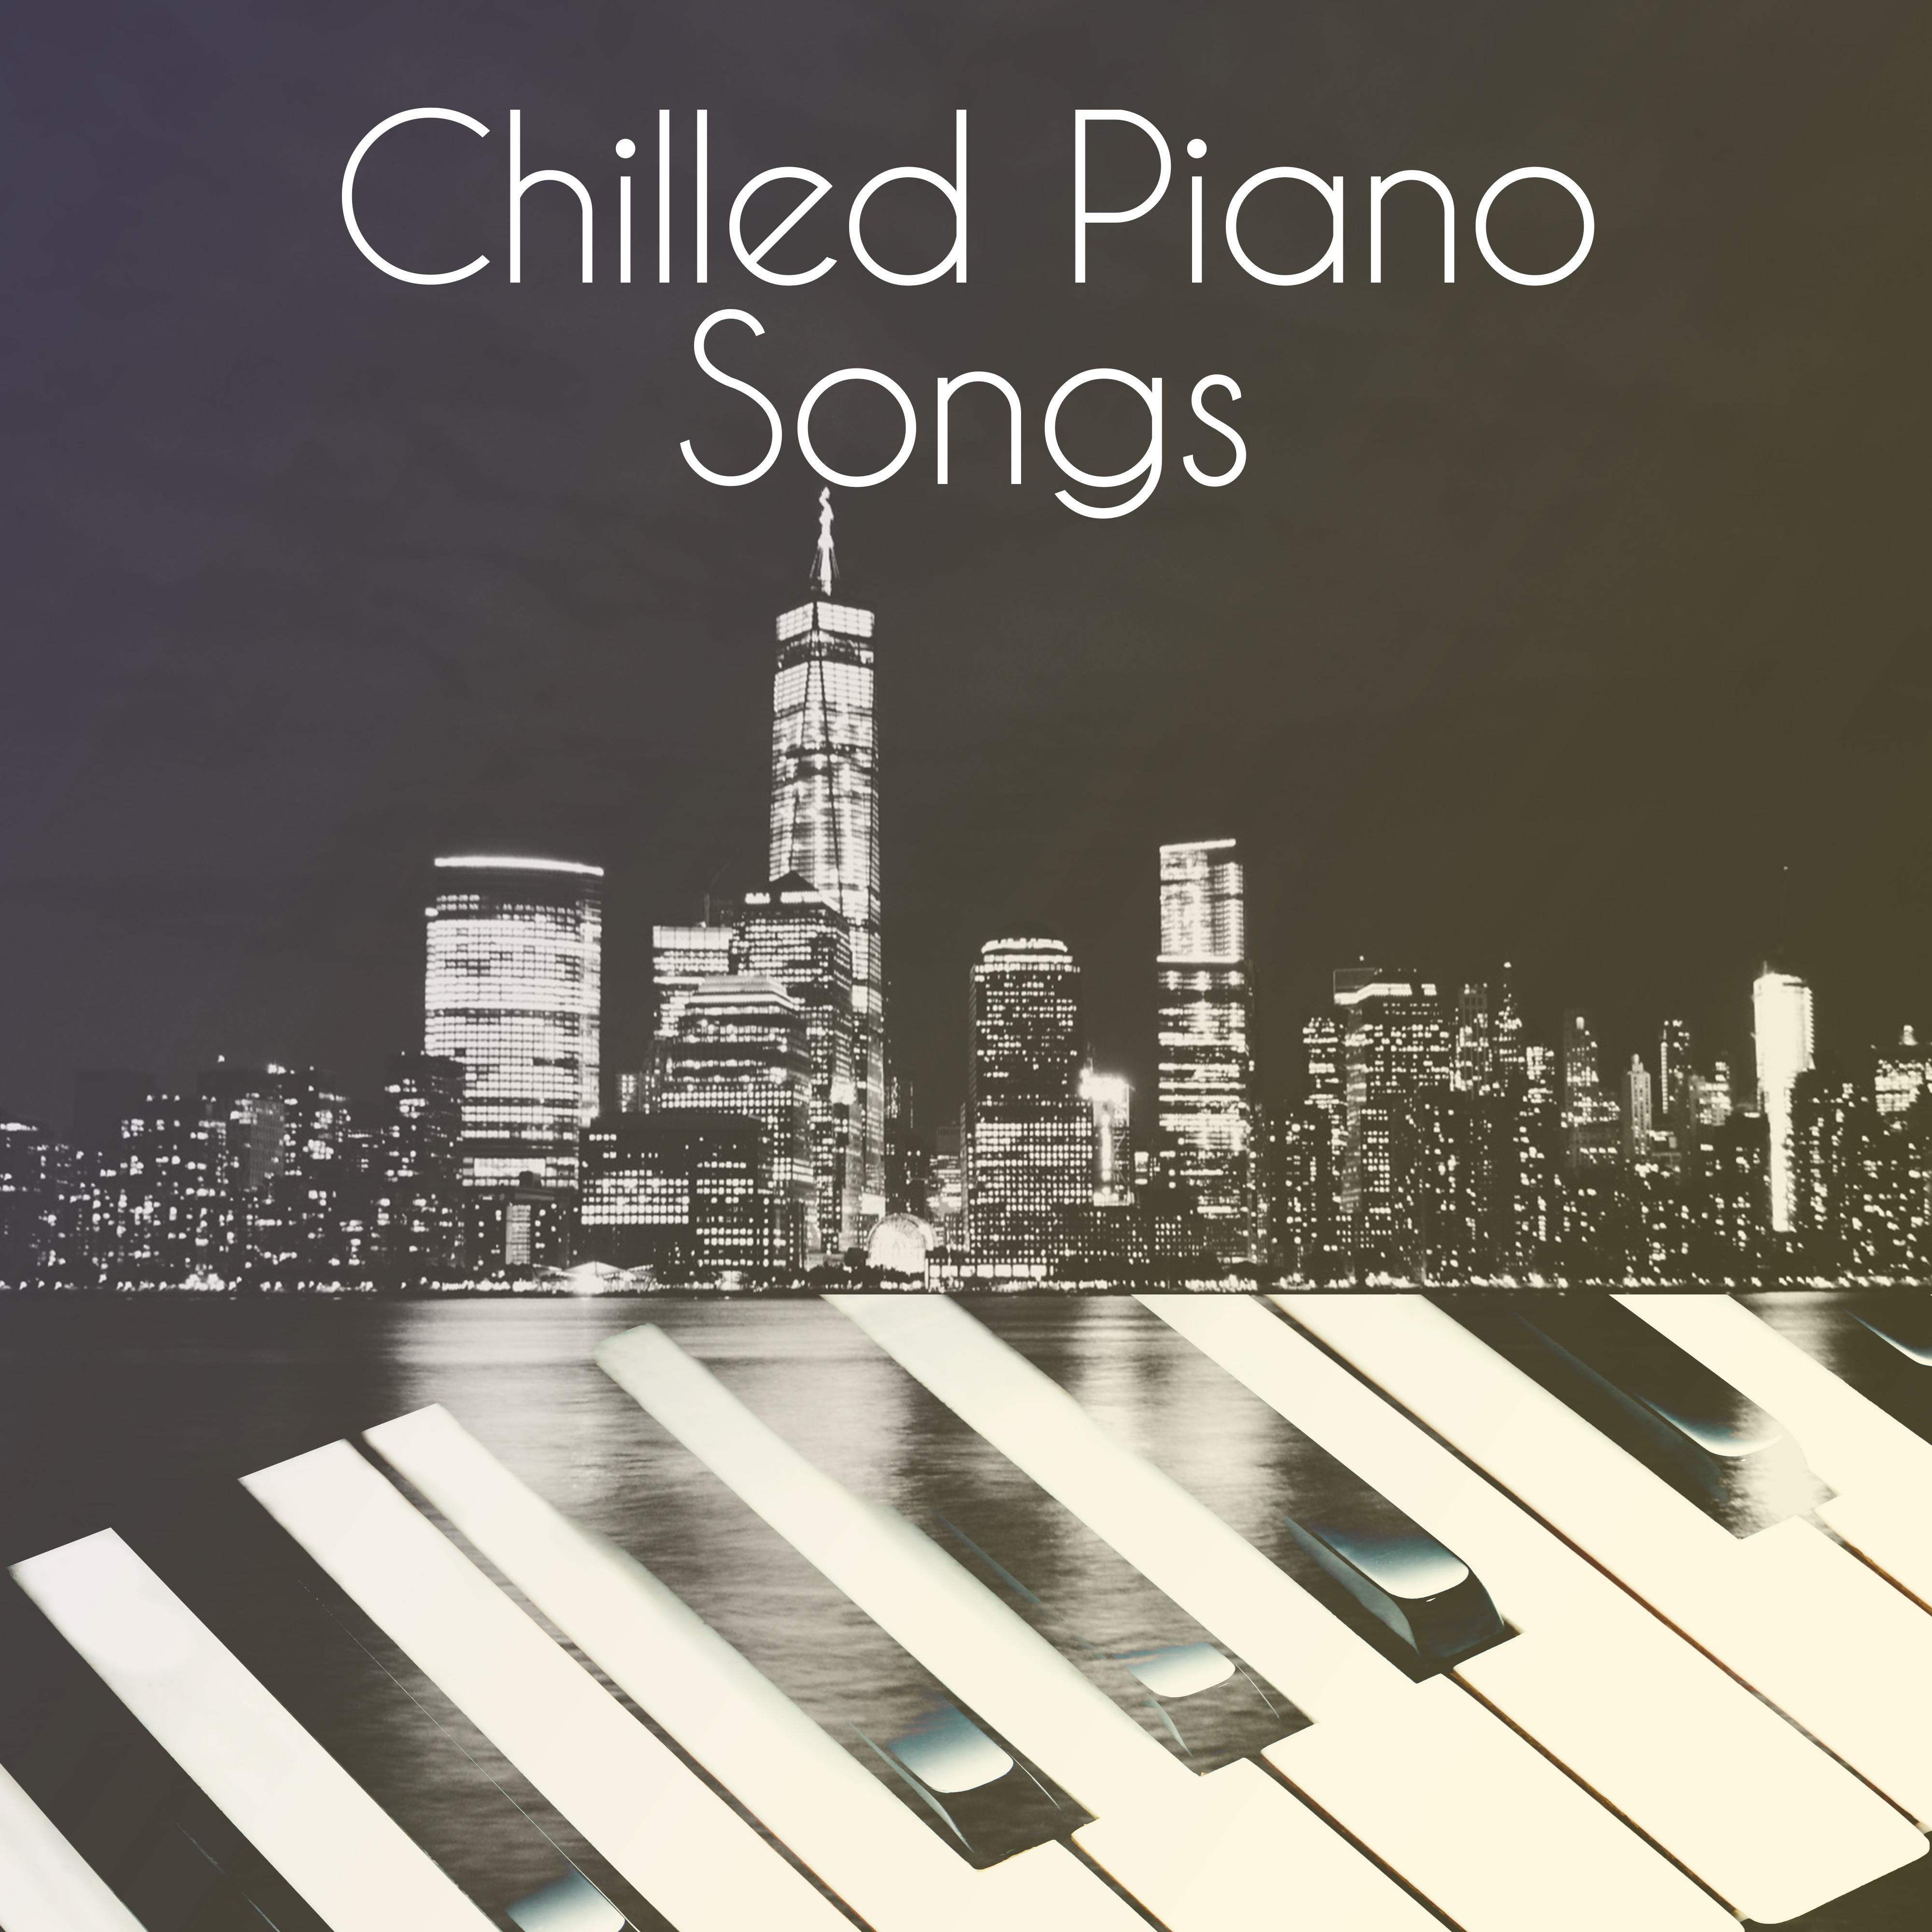 Chilled Piano Songs – Simple Instrumental Piano Music, Smooth Jazz, Relaxing Jazz Songs